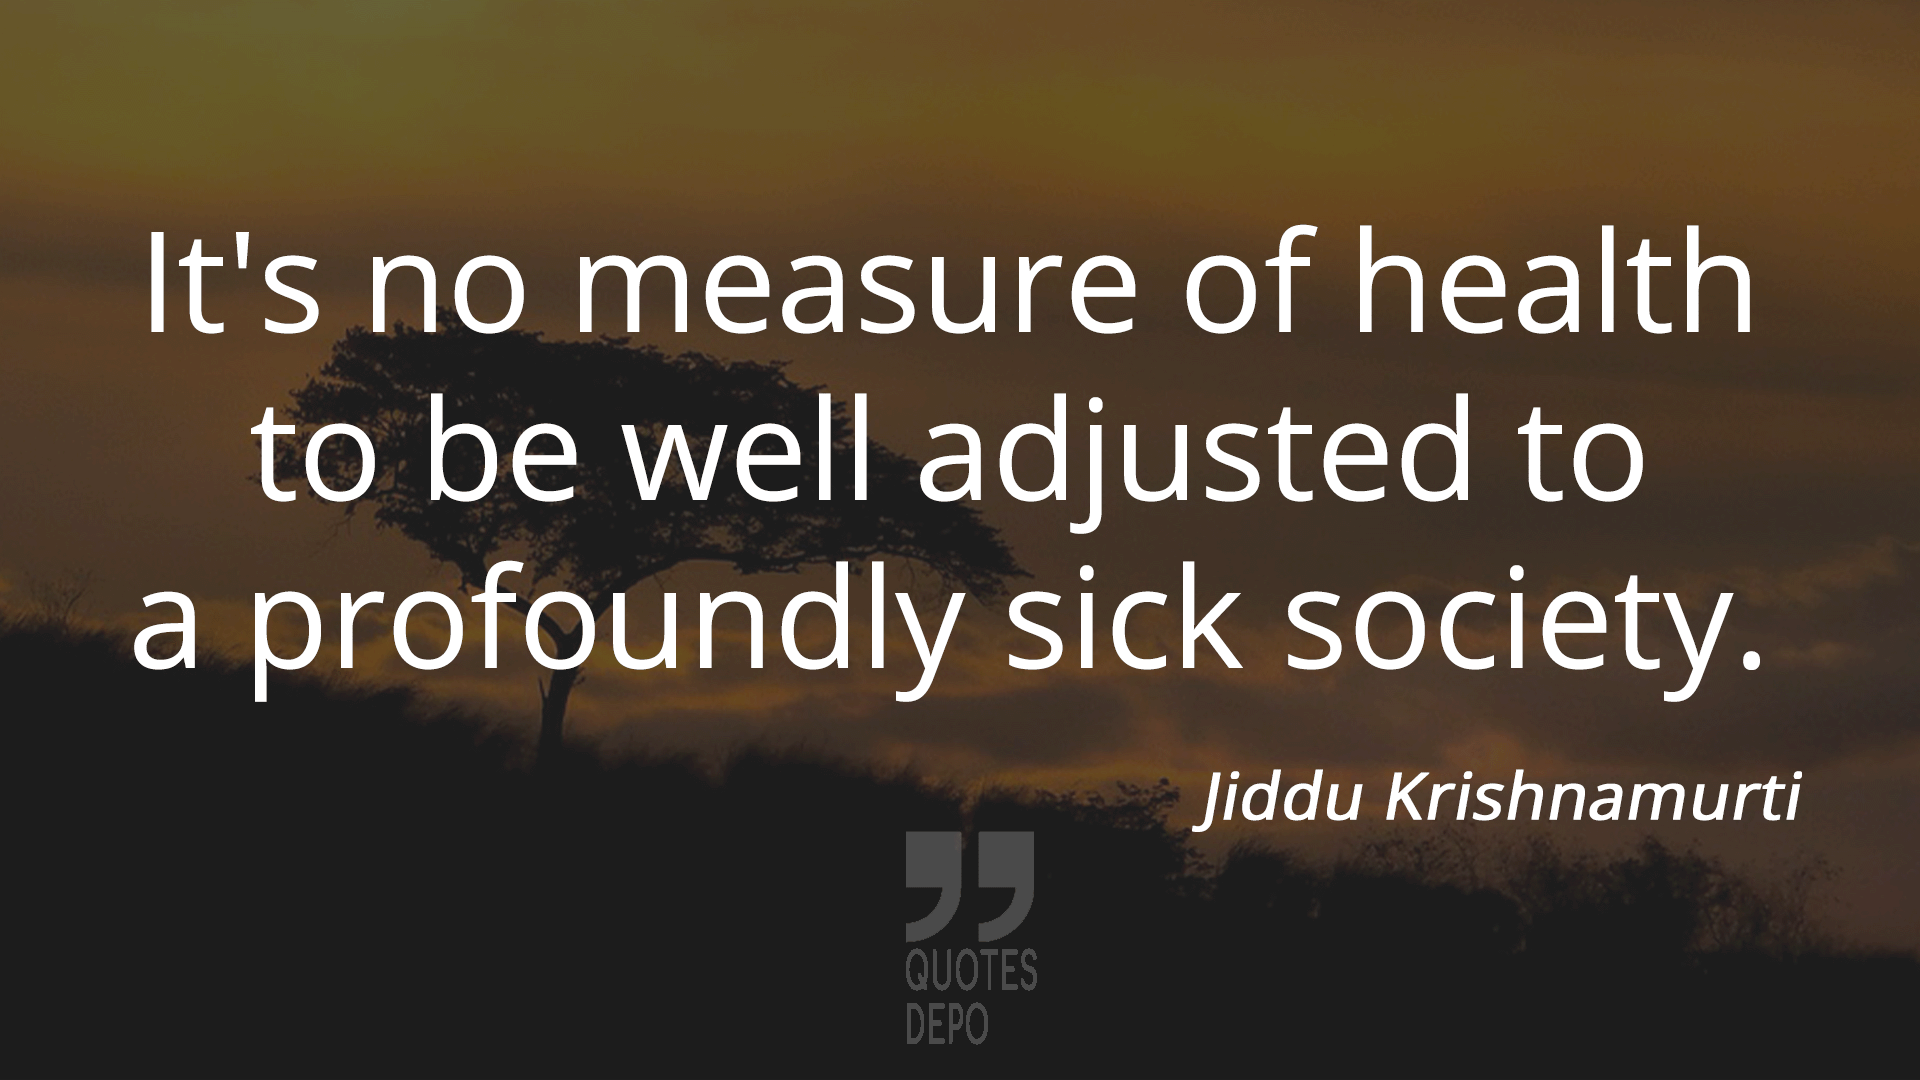 it's no measure of health to be well adjusted to a profoundly sick society - jiddu krishnamurti quotes